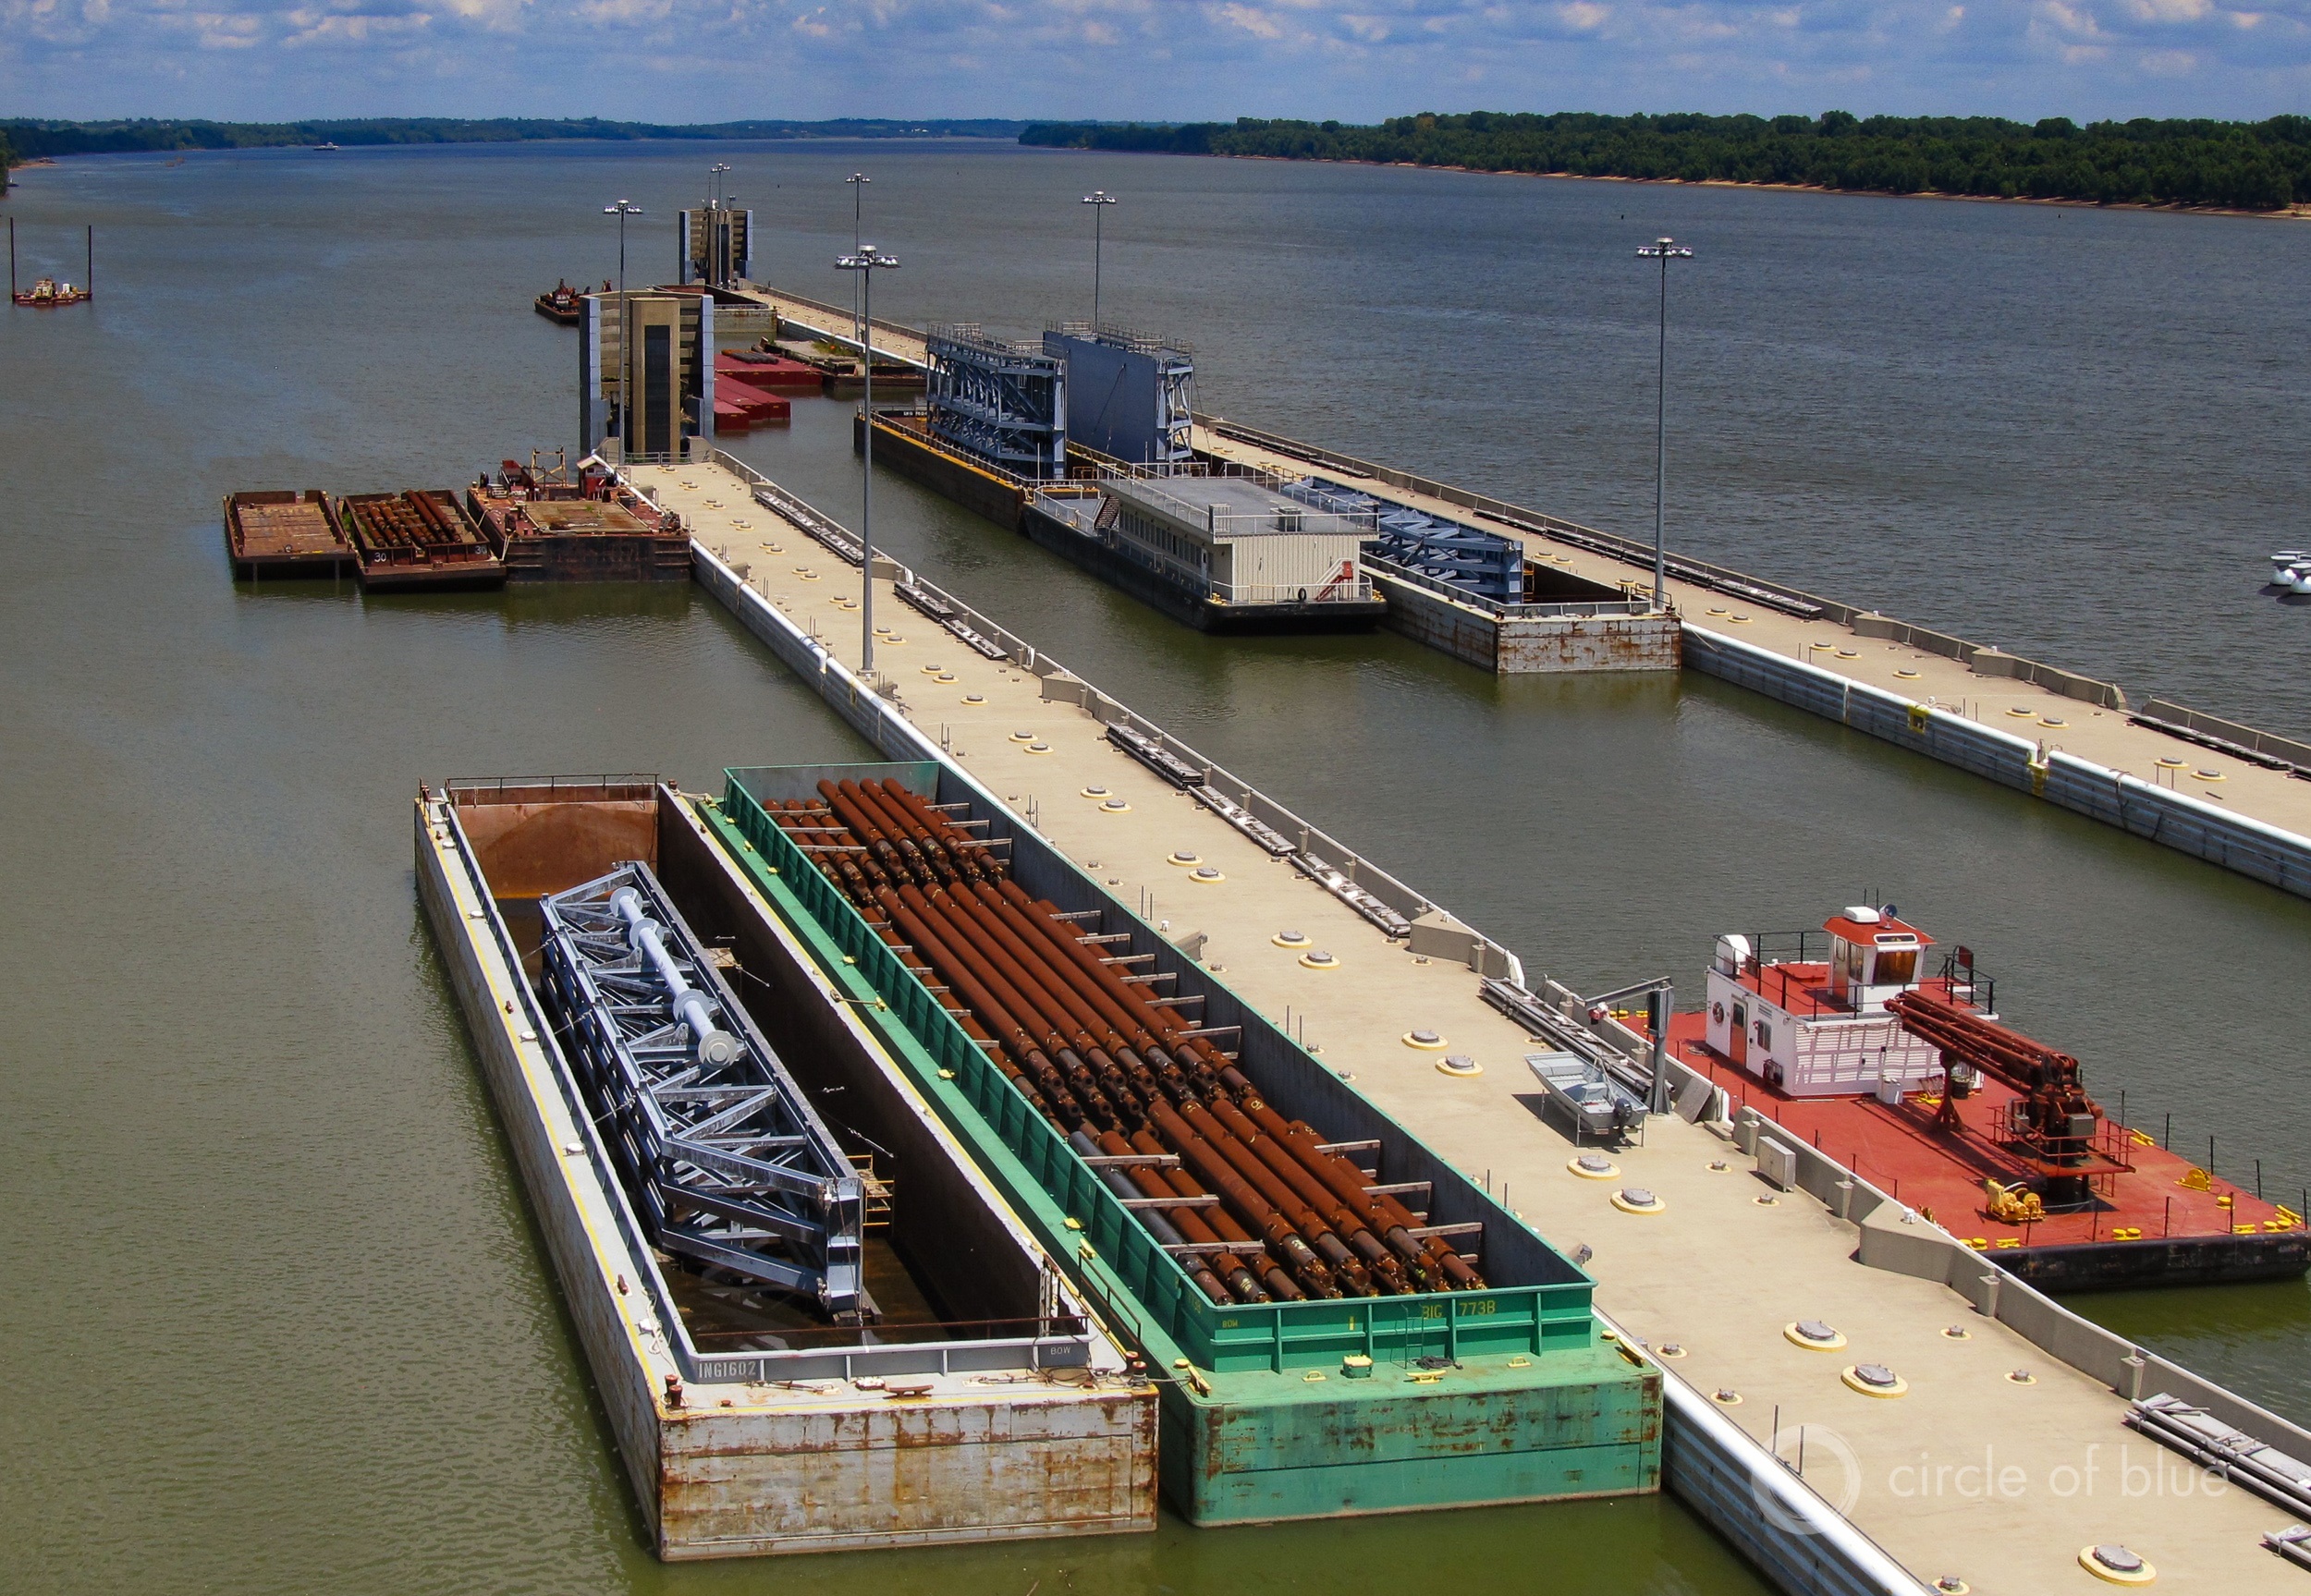 Olmsted Locks and Dam, on the Ohio River between Kentucky and Illinois, has the highest hydropower potential of any dam without the current capacity to generate electricity. The entire watershed is a hot spot for this sort of project. Developers added turbines to three Ohio River locks this year. More than a dozen other electricity-generating projects are planned for locks on the river's tributaries. Photo © Keith Schneider / Circle of Blue